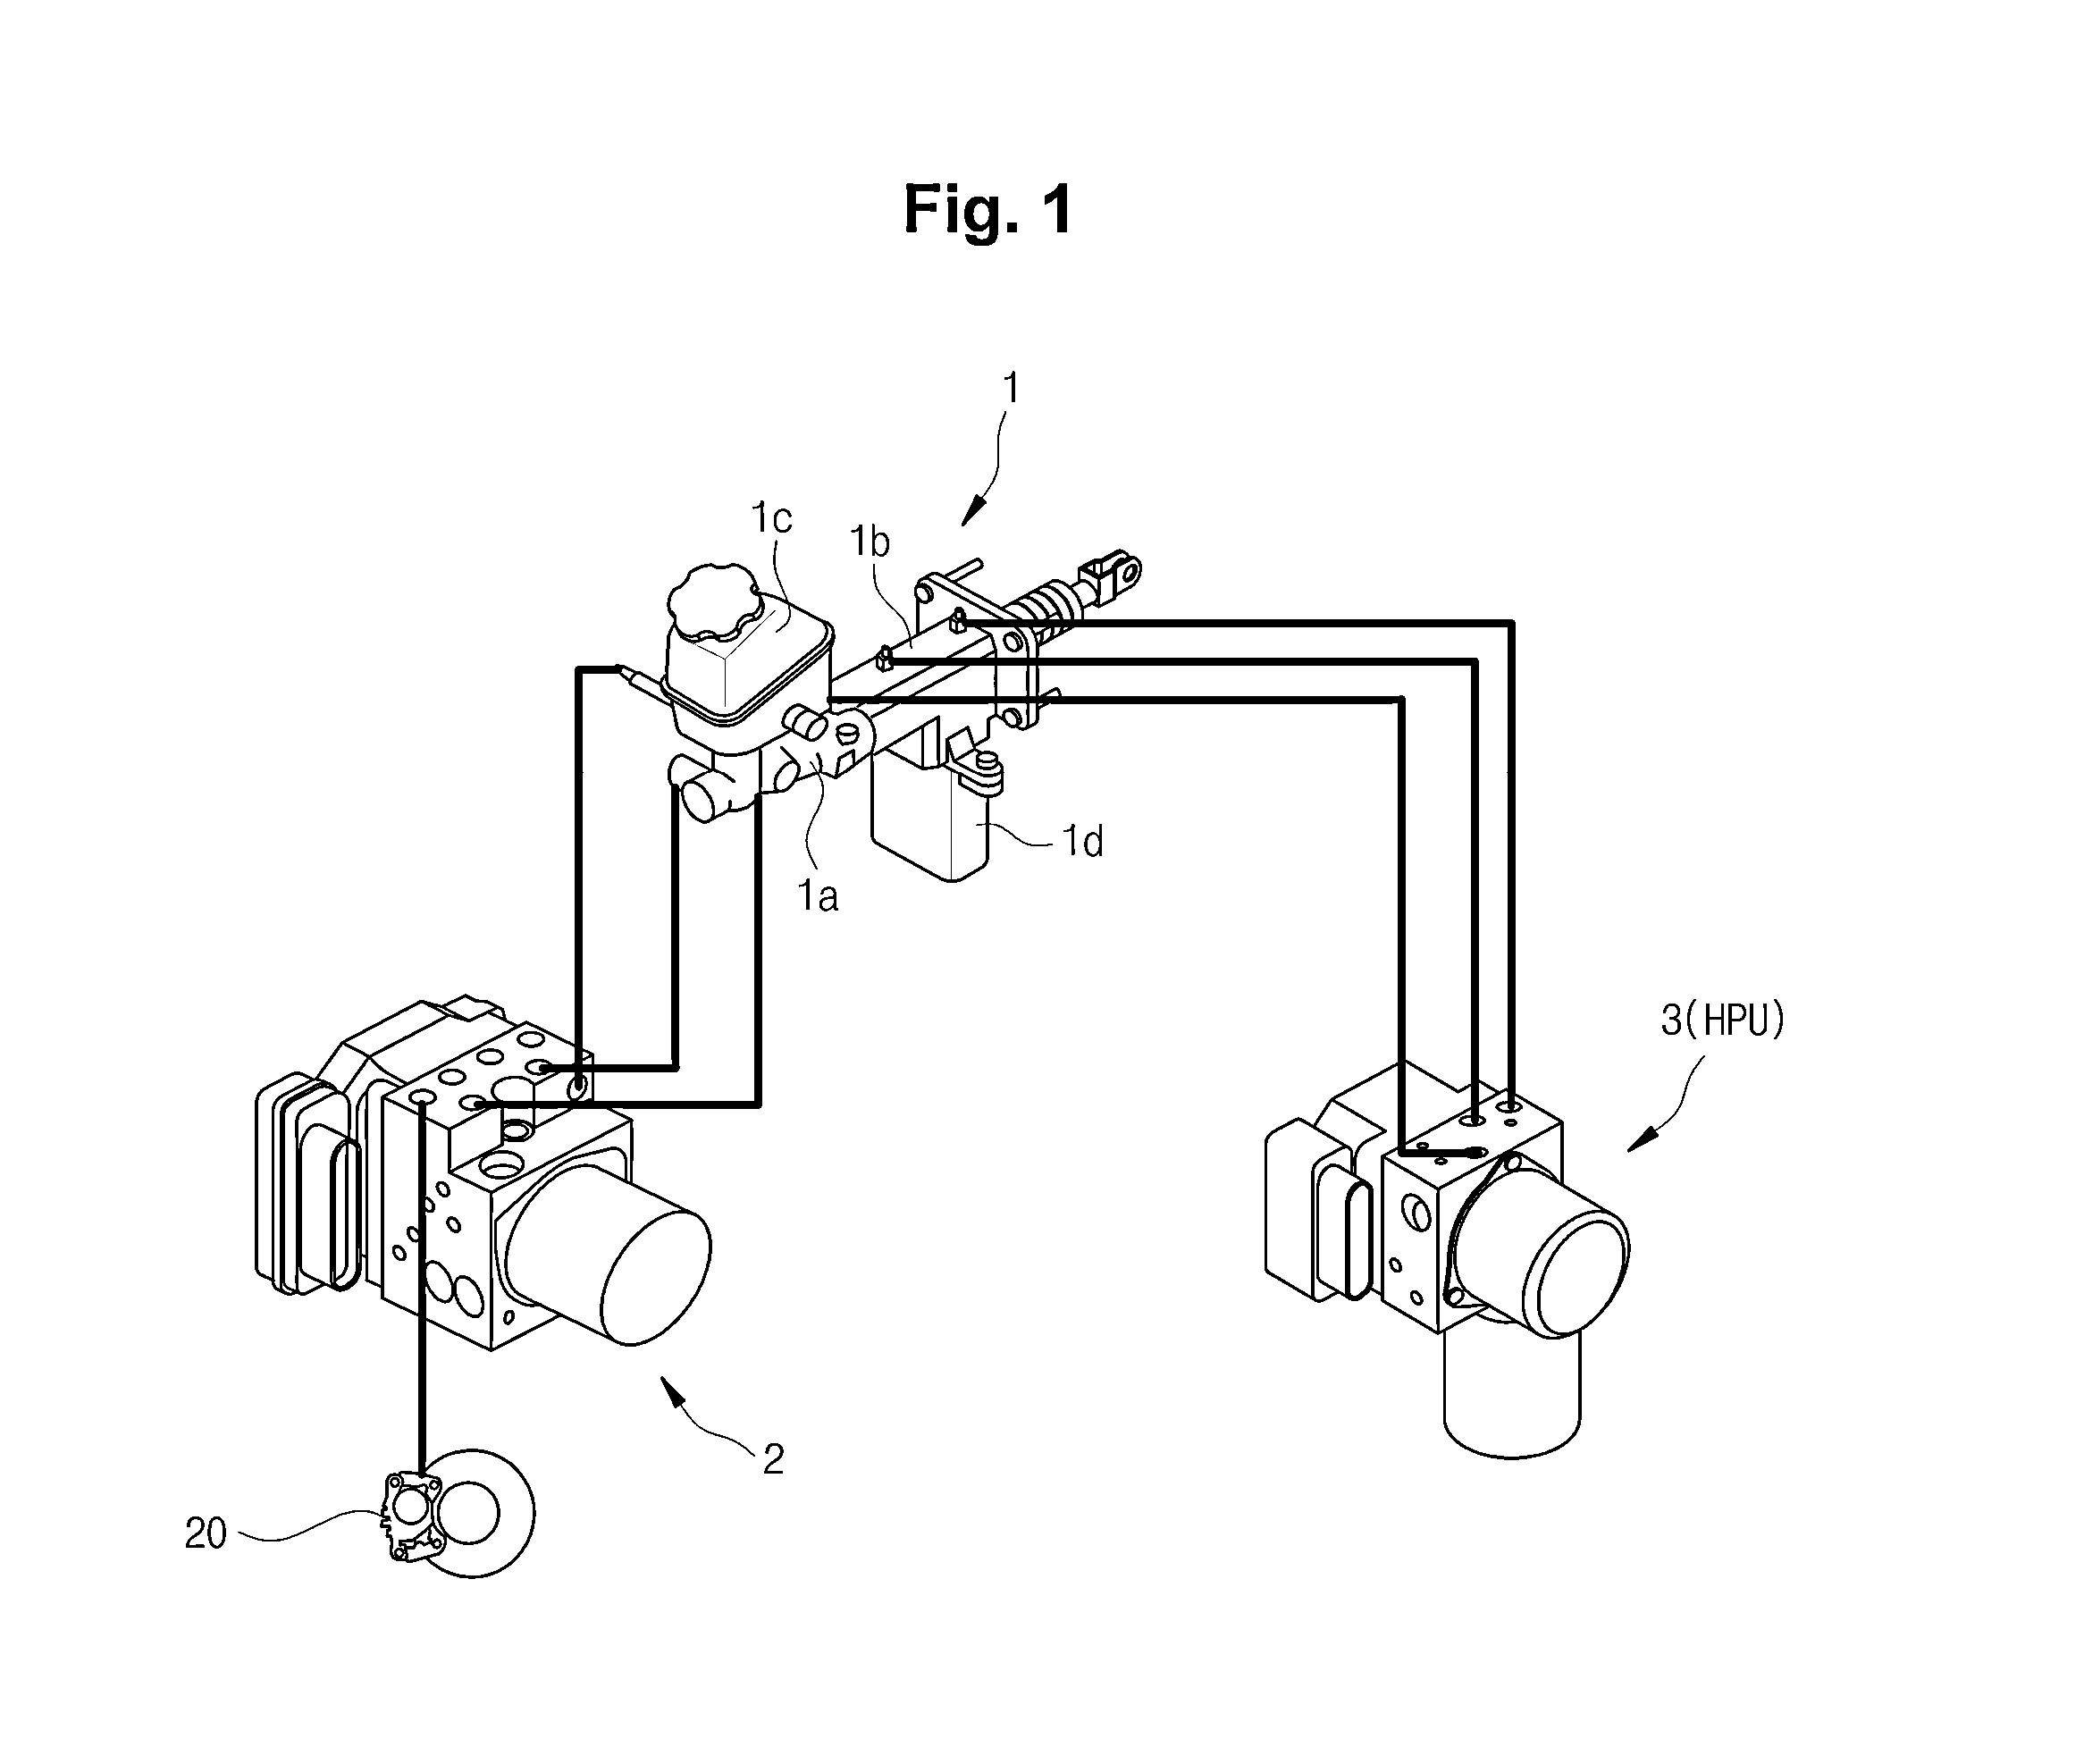 Integrated electro-hydraulic brake system